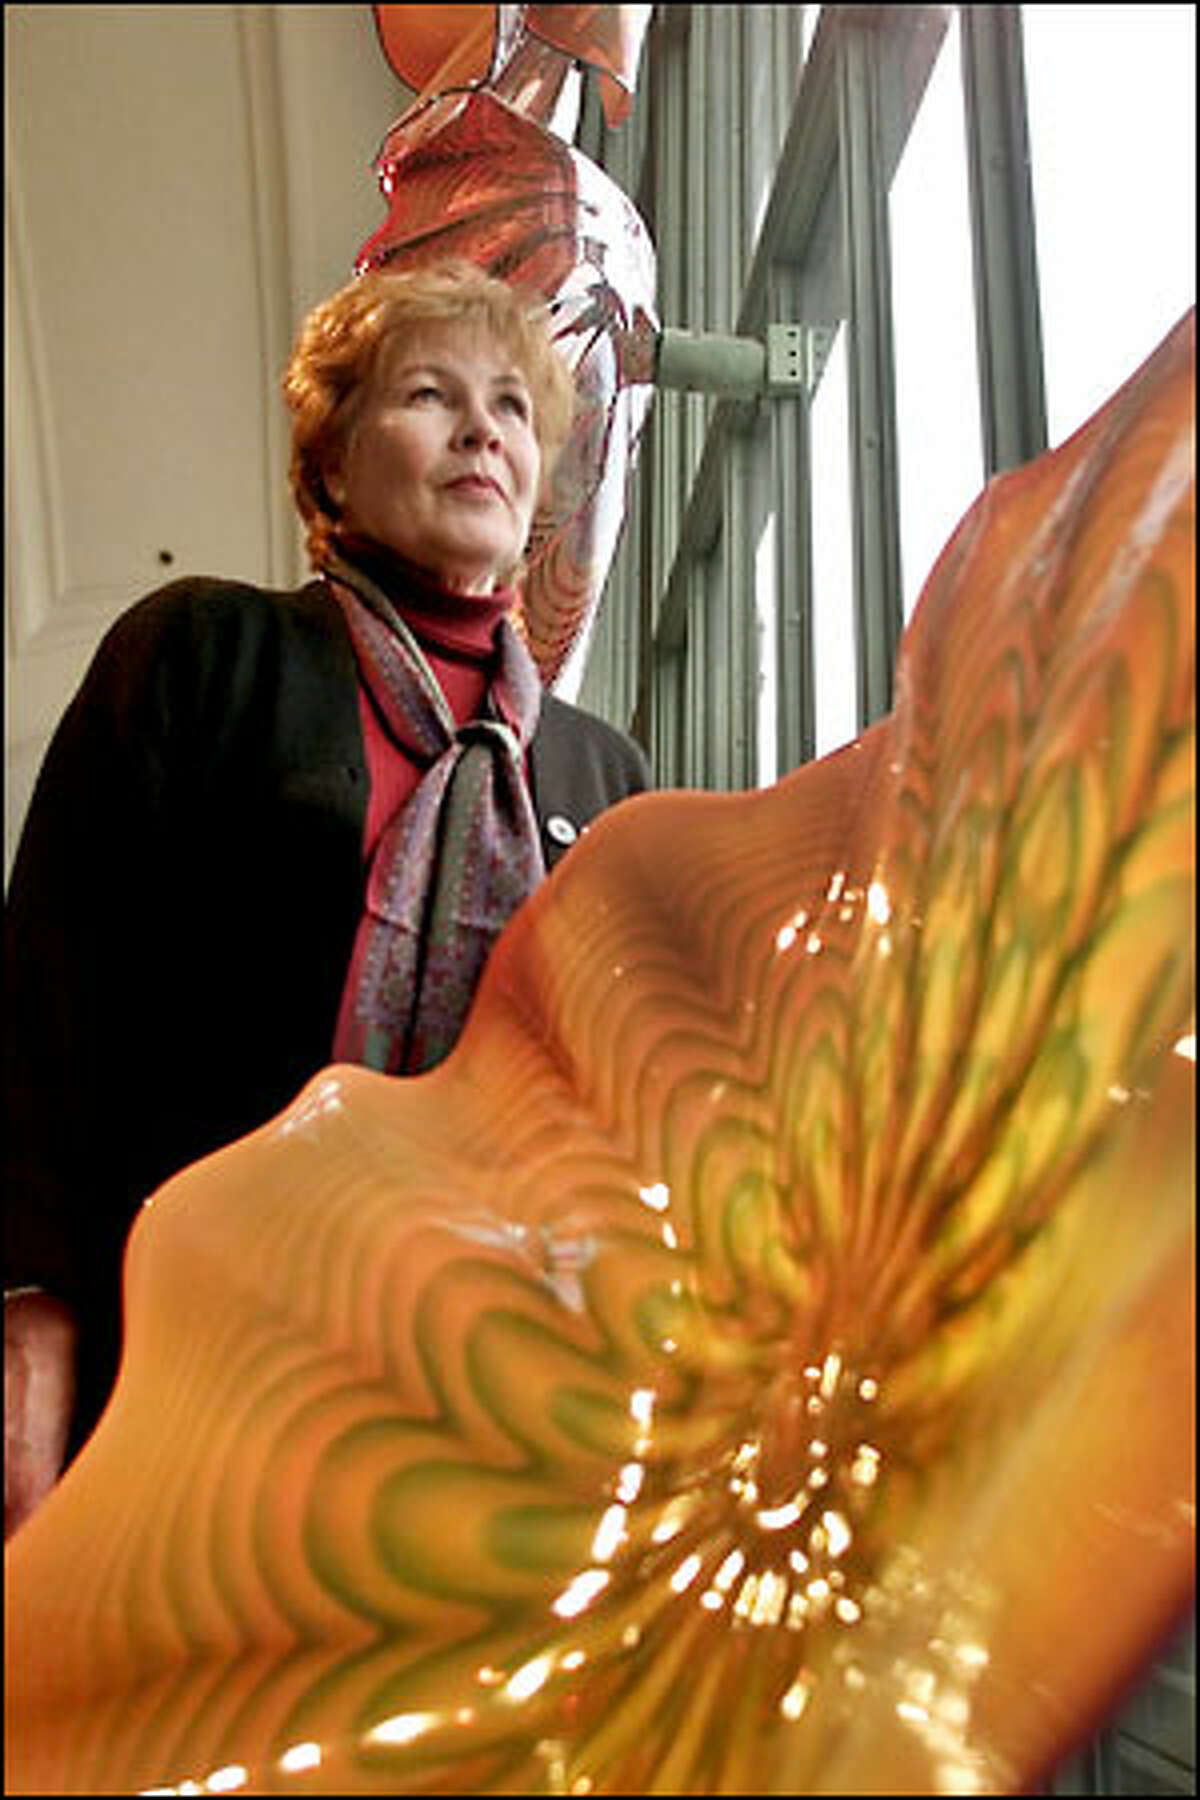 Bonnie Gallagher is the Arts Education director for the Chihuly display at Union Station in Tacoma. She was hoping those pieces survived the shaking.